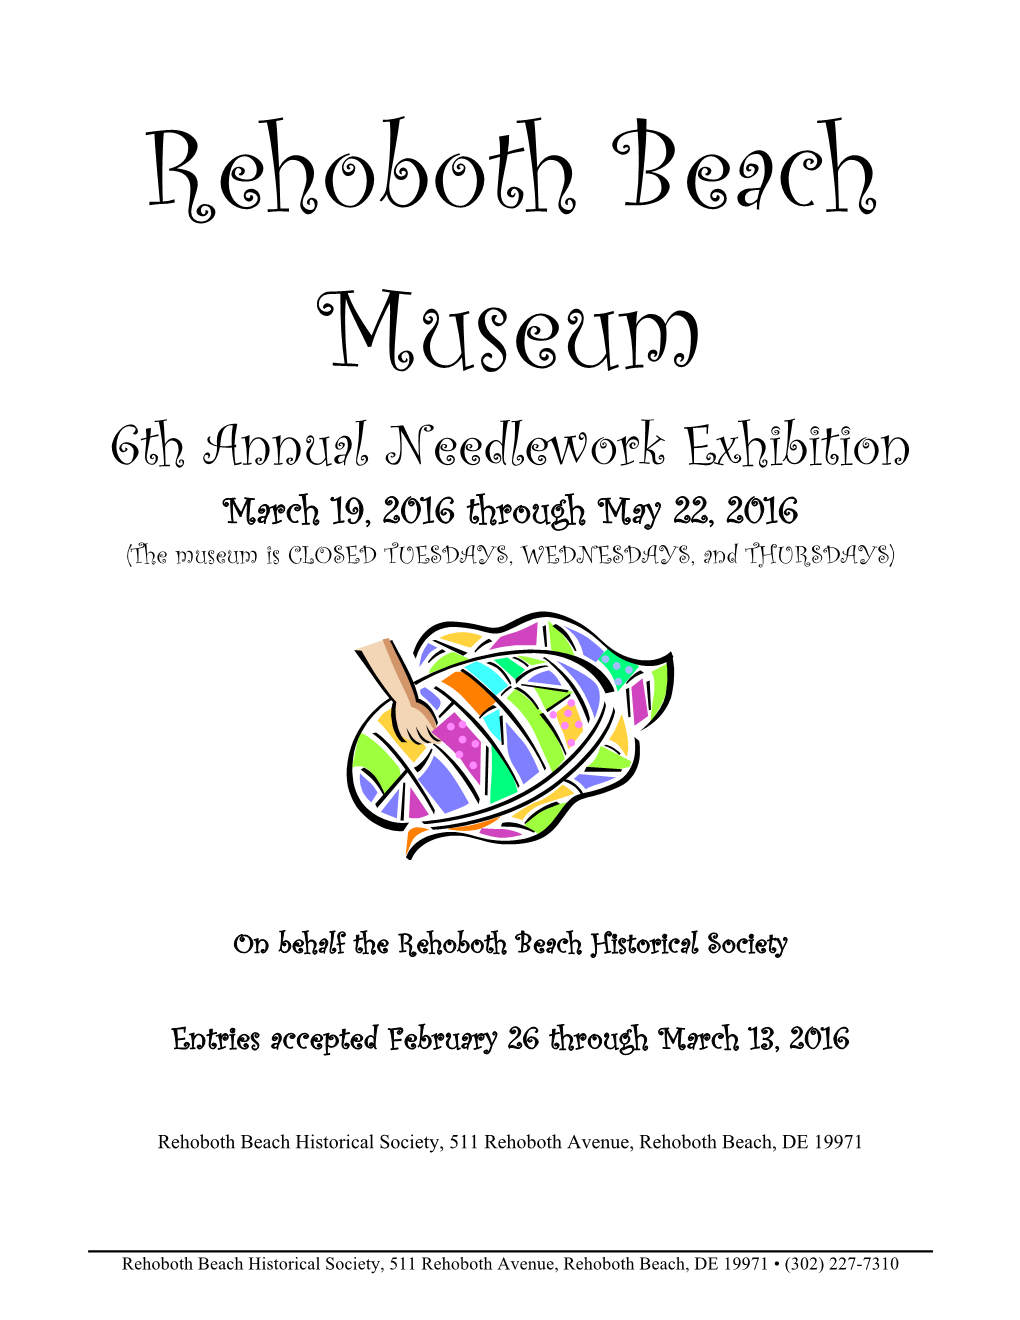 6Th Annual Needlework Exhibition March 19, 2016 Through May 22, 2016 (The Museum Is CLOSED TUESDAYS, WEDNESDAYS, and THURSDAYS)